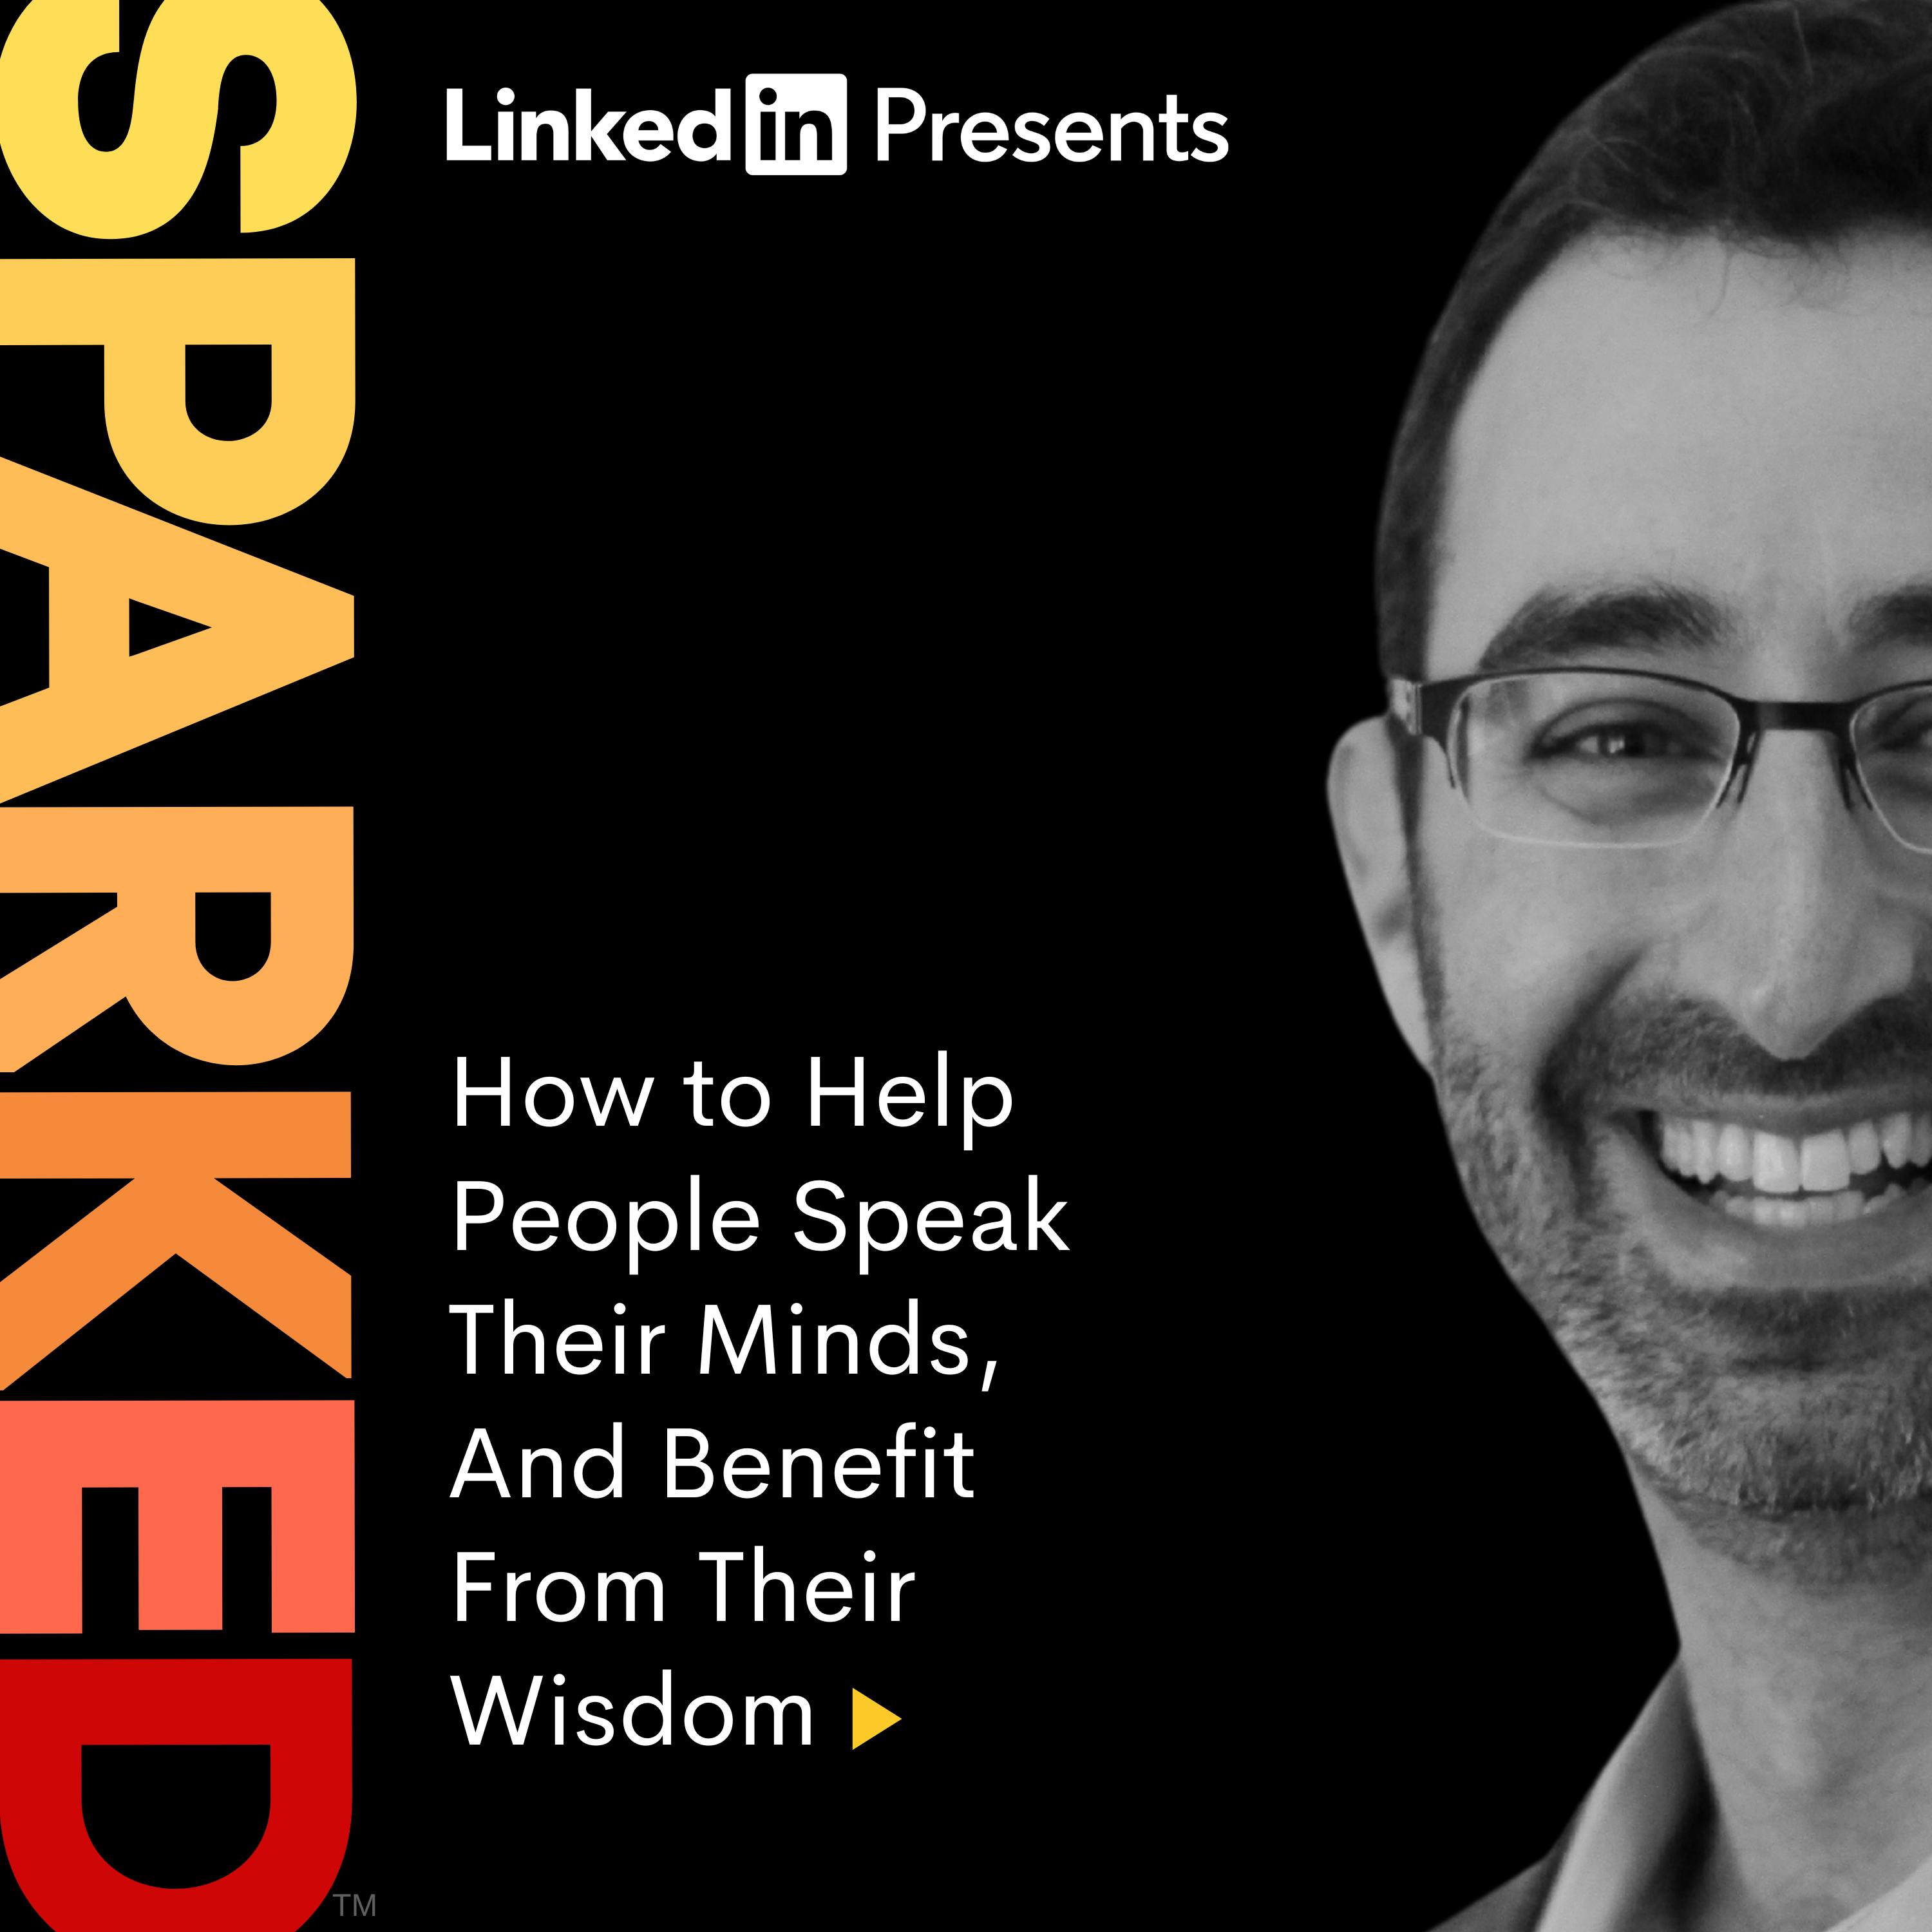 Jeff Wetzler | How to Help People Speak Their Minds, And Benefit From Their Wisdom